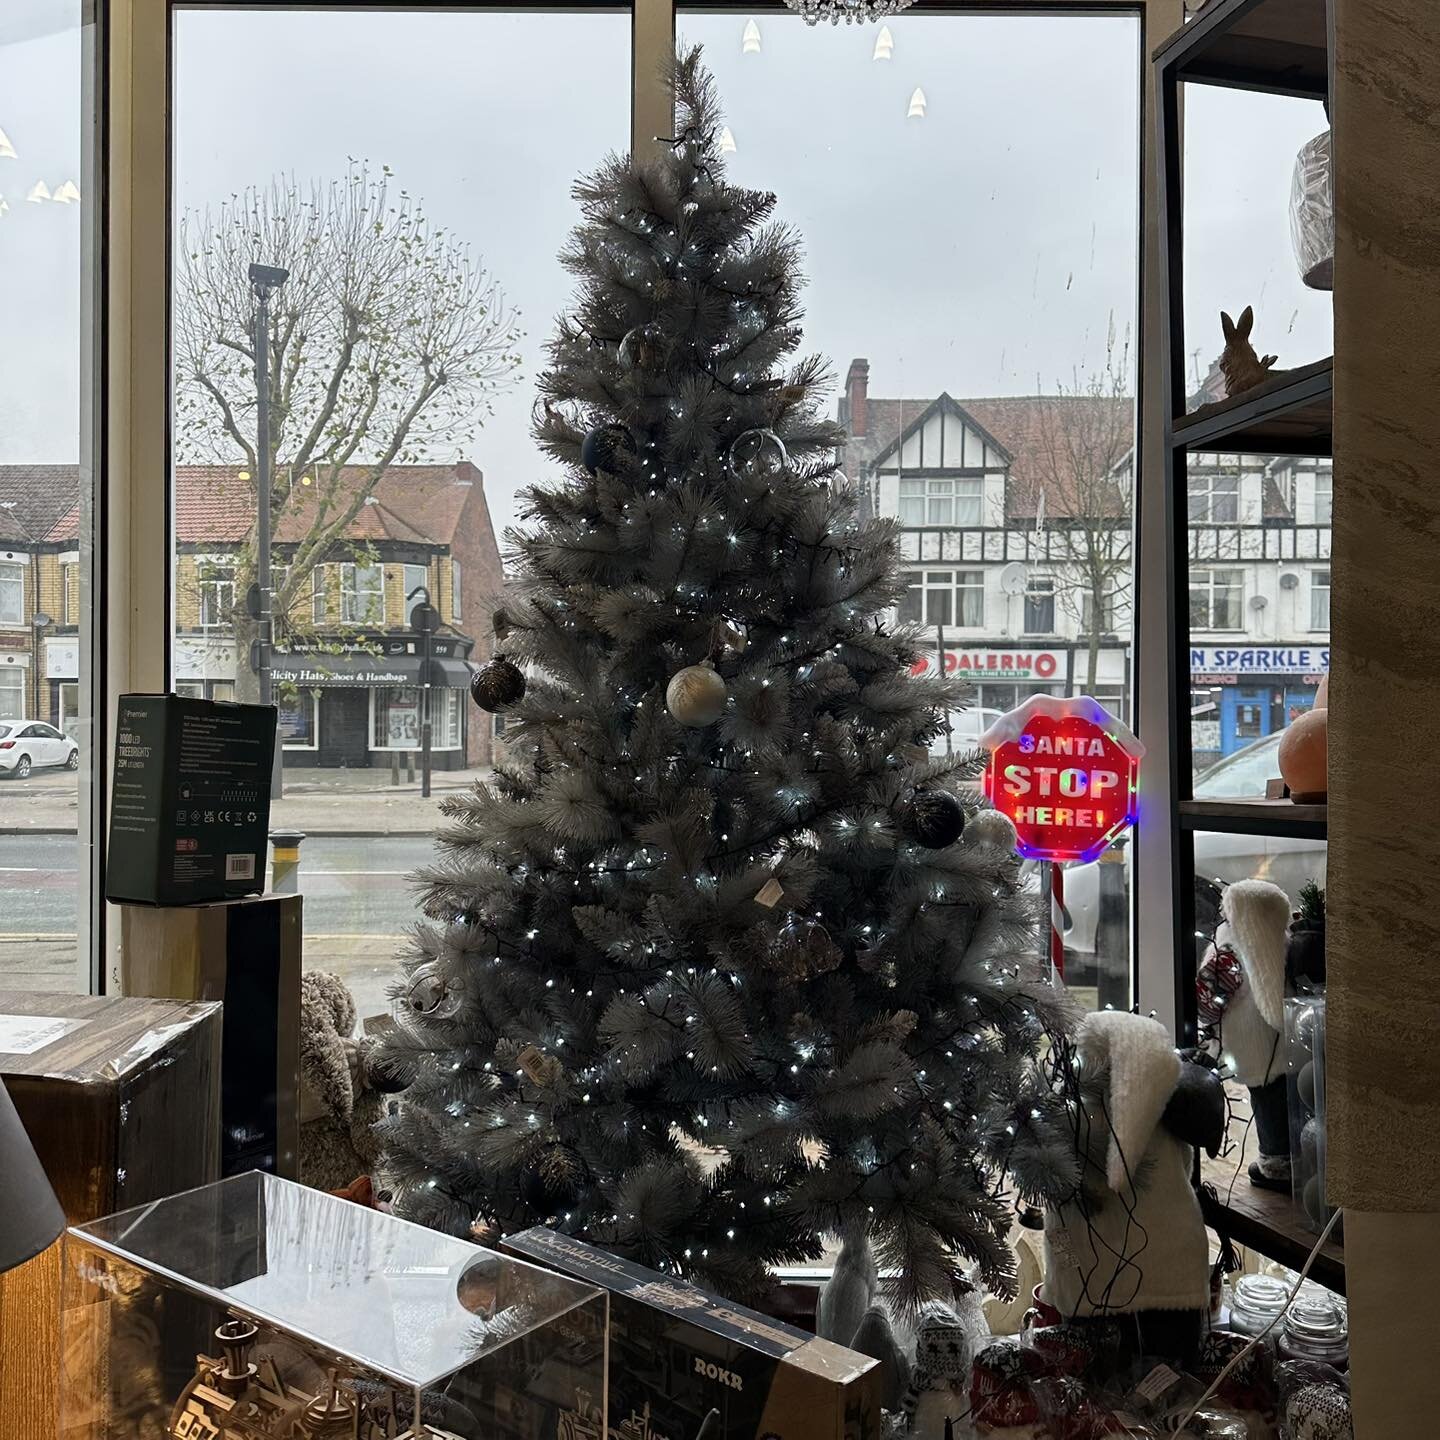 🎄🎅🏻Day 2 of 24🎅🏻🎄

Looking for a unique and different Christmas tree this year?

Well look no further than this amazing 7ft silver tipped tree perfect for adding that extra sparkle to any room this Christmas.

https://www.homedecorhull.com/home